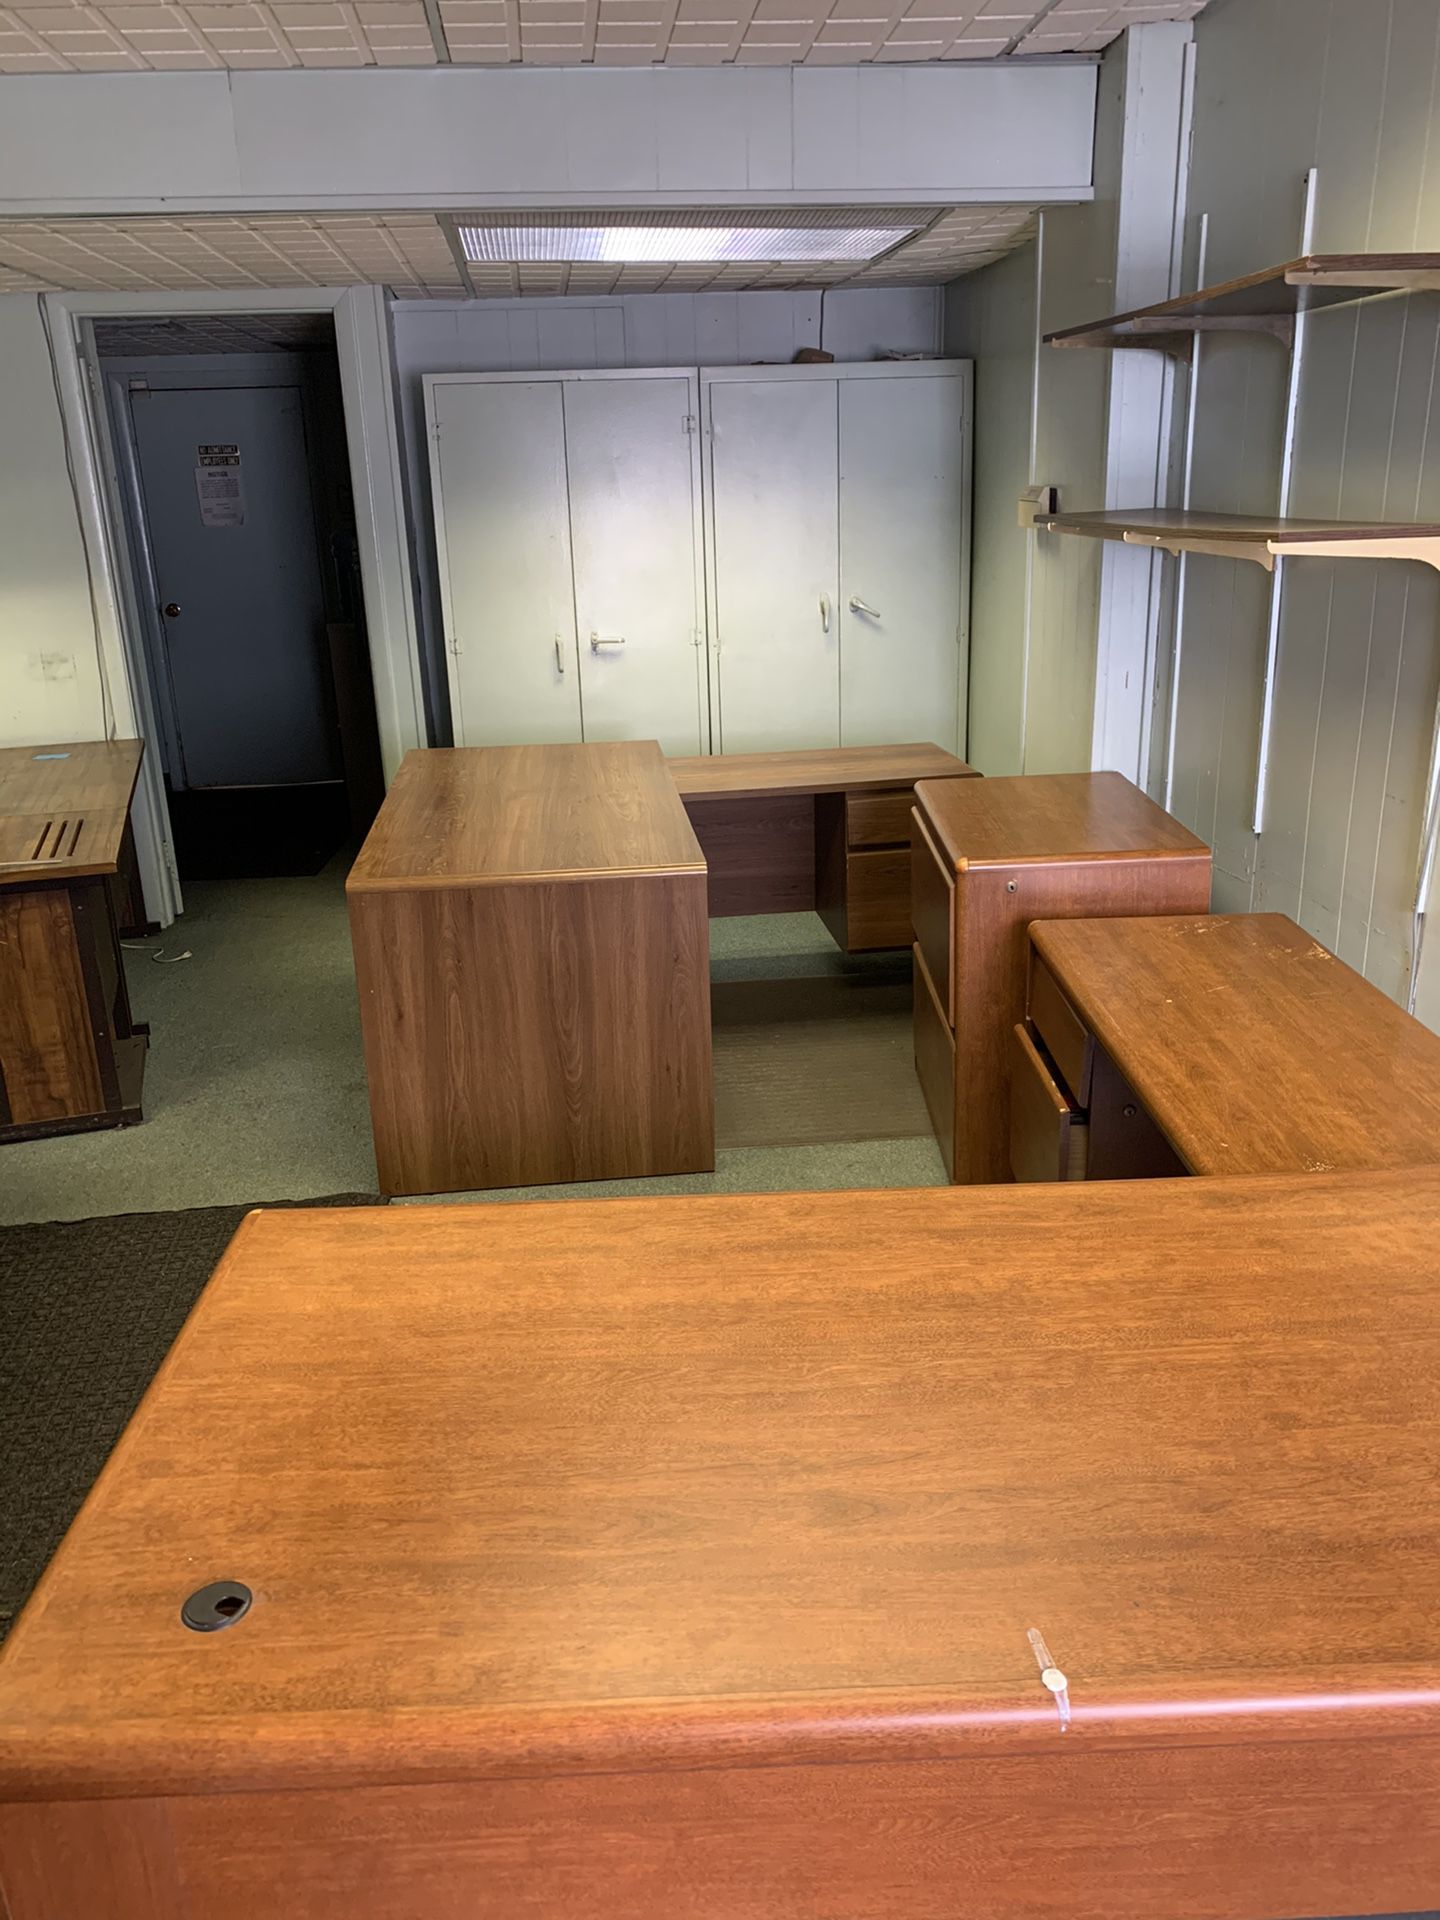 Free TODAY Only Desks, Filing Cabinets, NicNaks